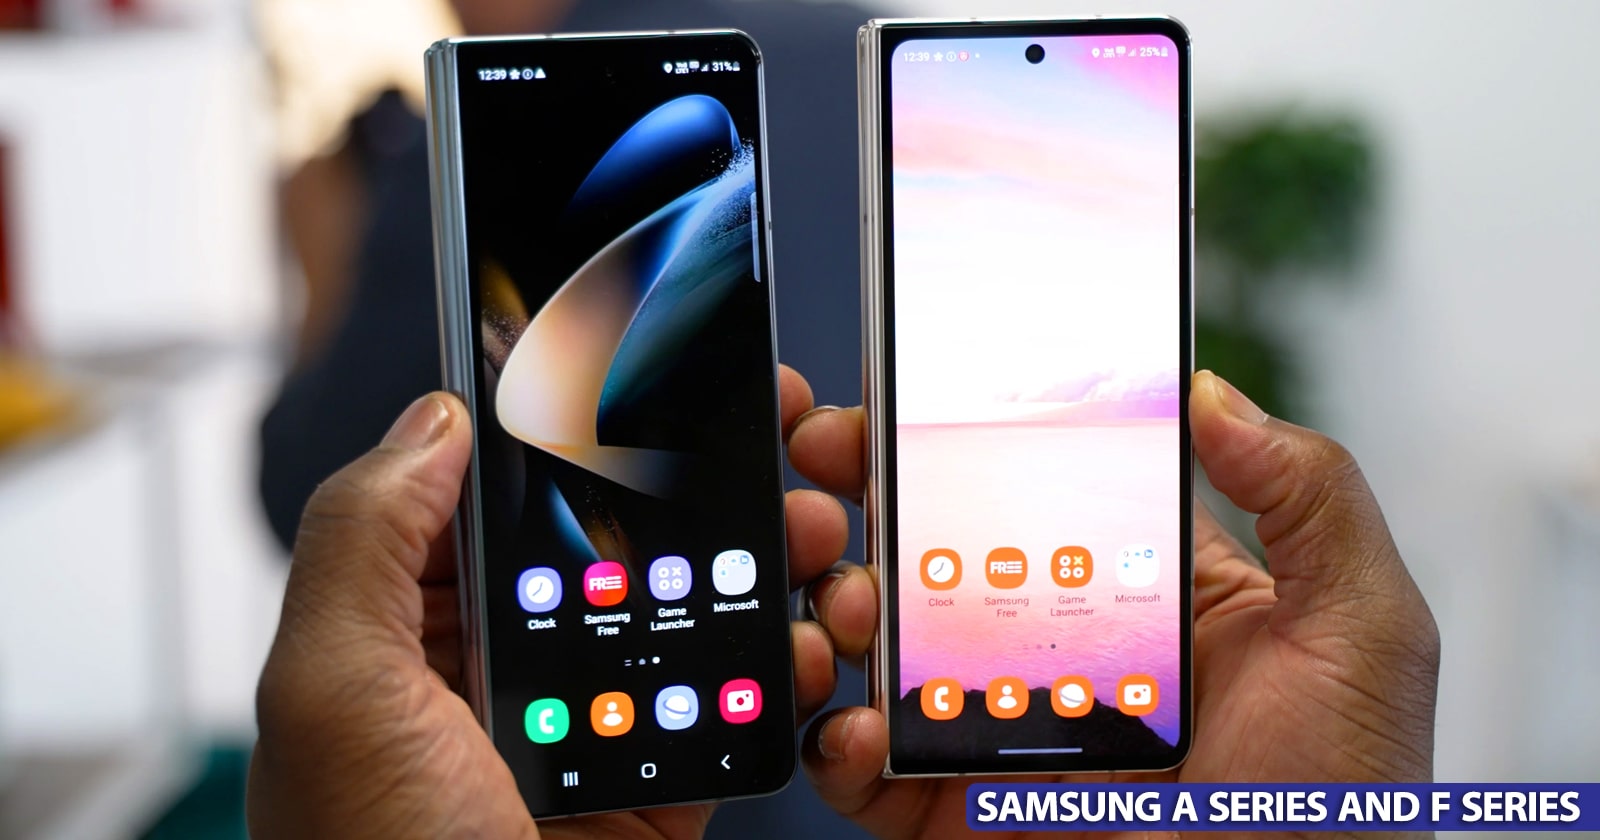 What Is the Difference Between Samsung A Series and F Series